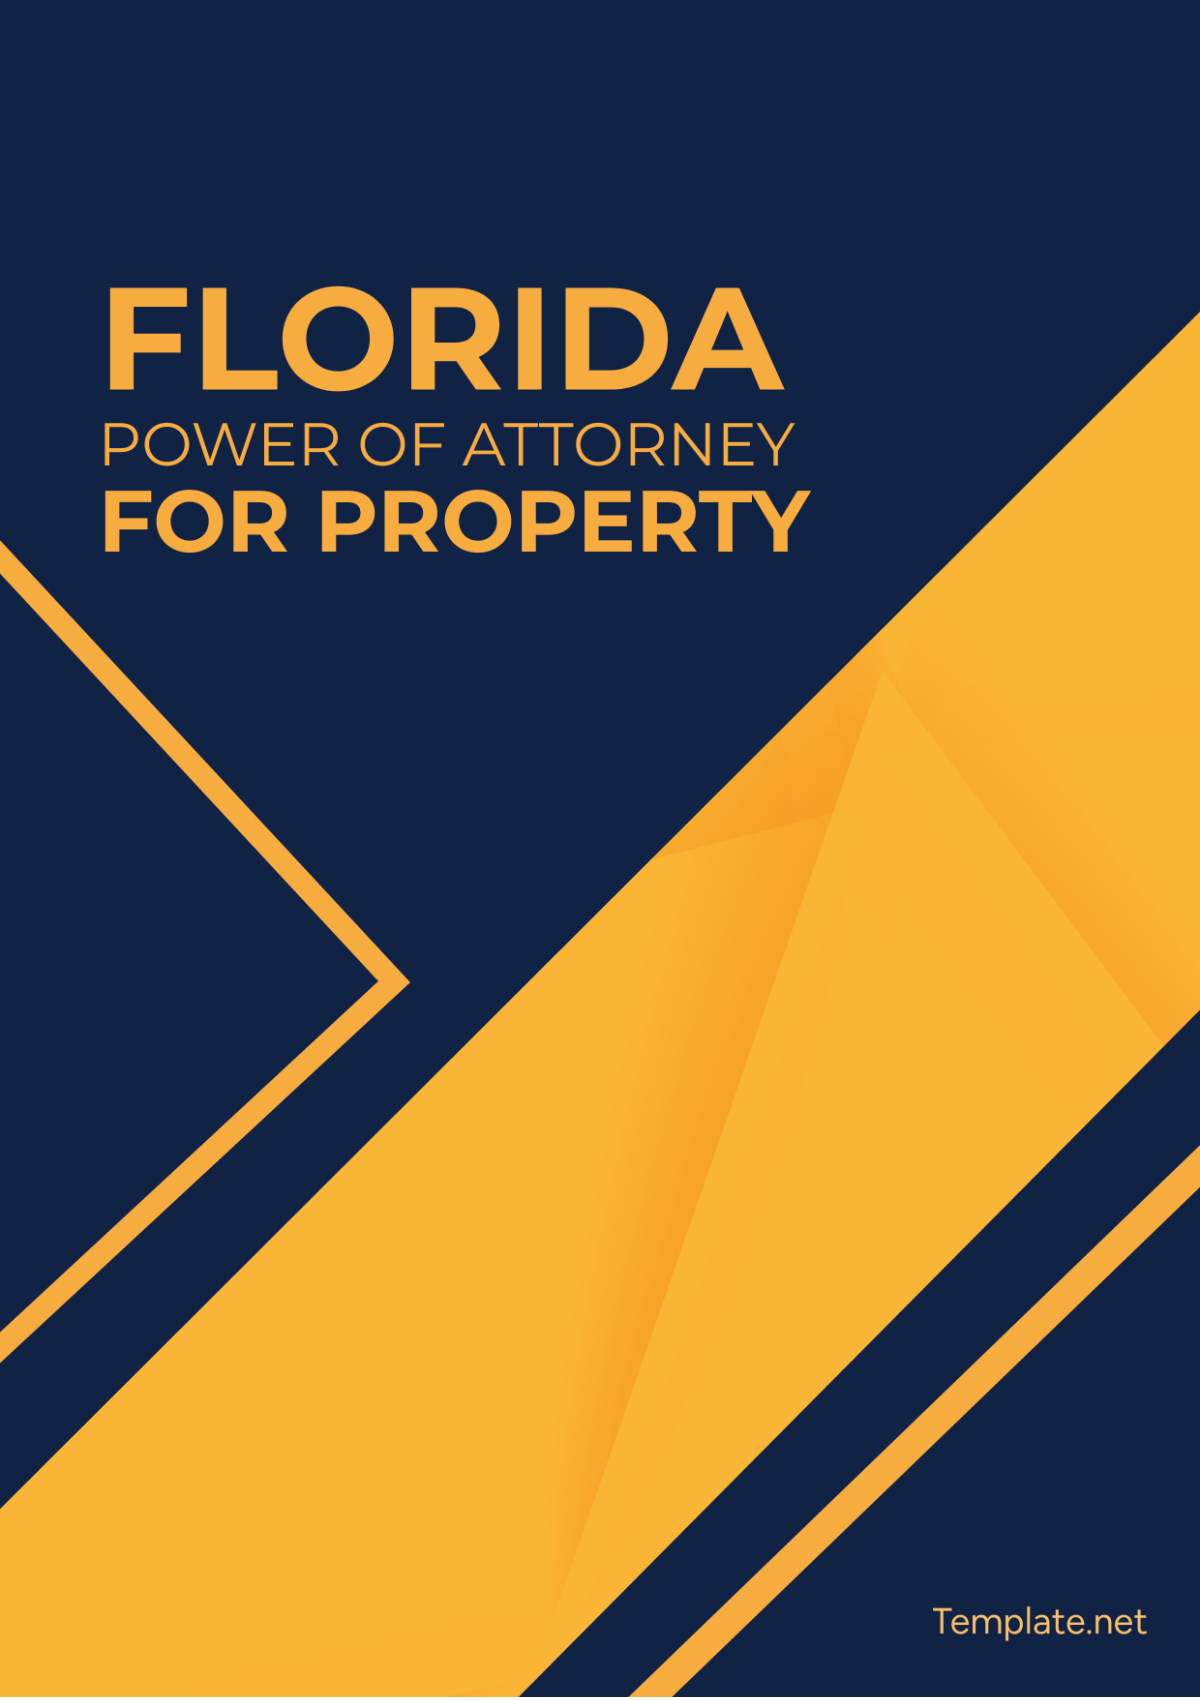 Florida Power of Attorney For Property Template